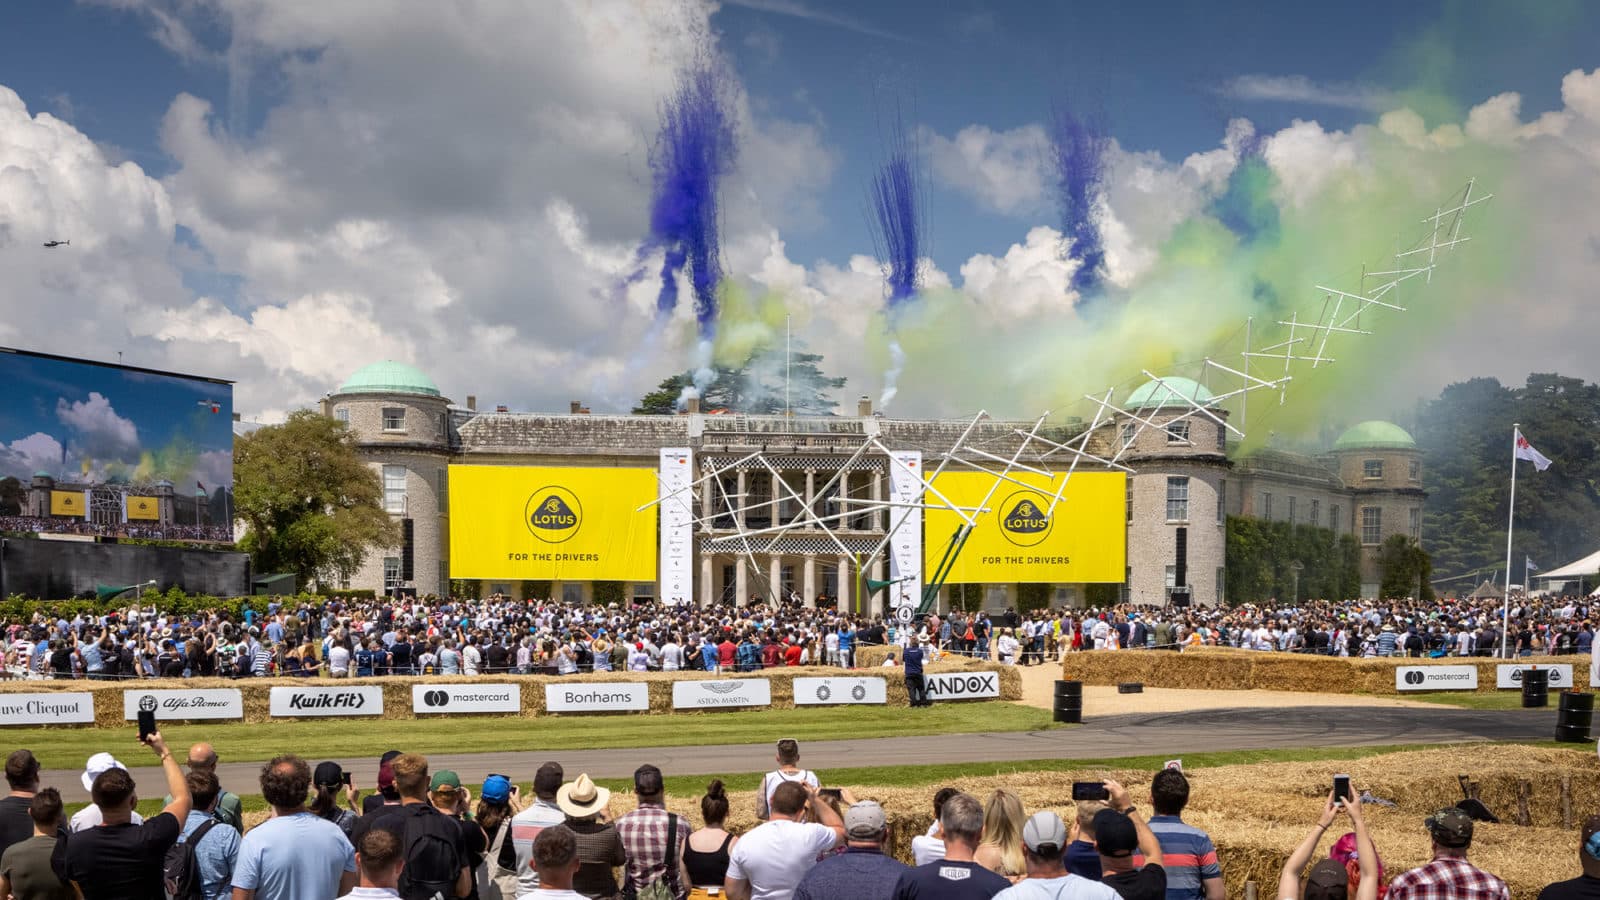 Fireworks at 2021 Goodwood Festival of Speed